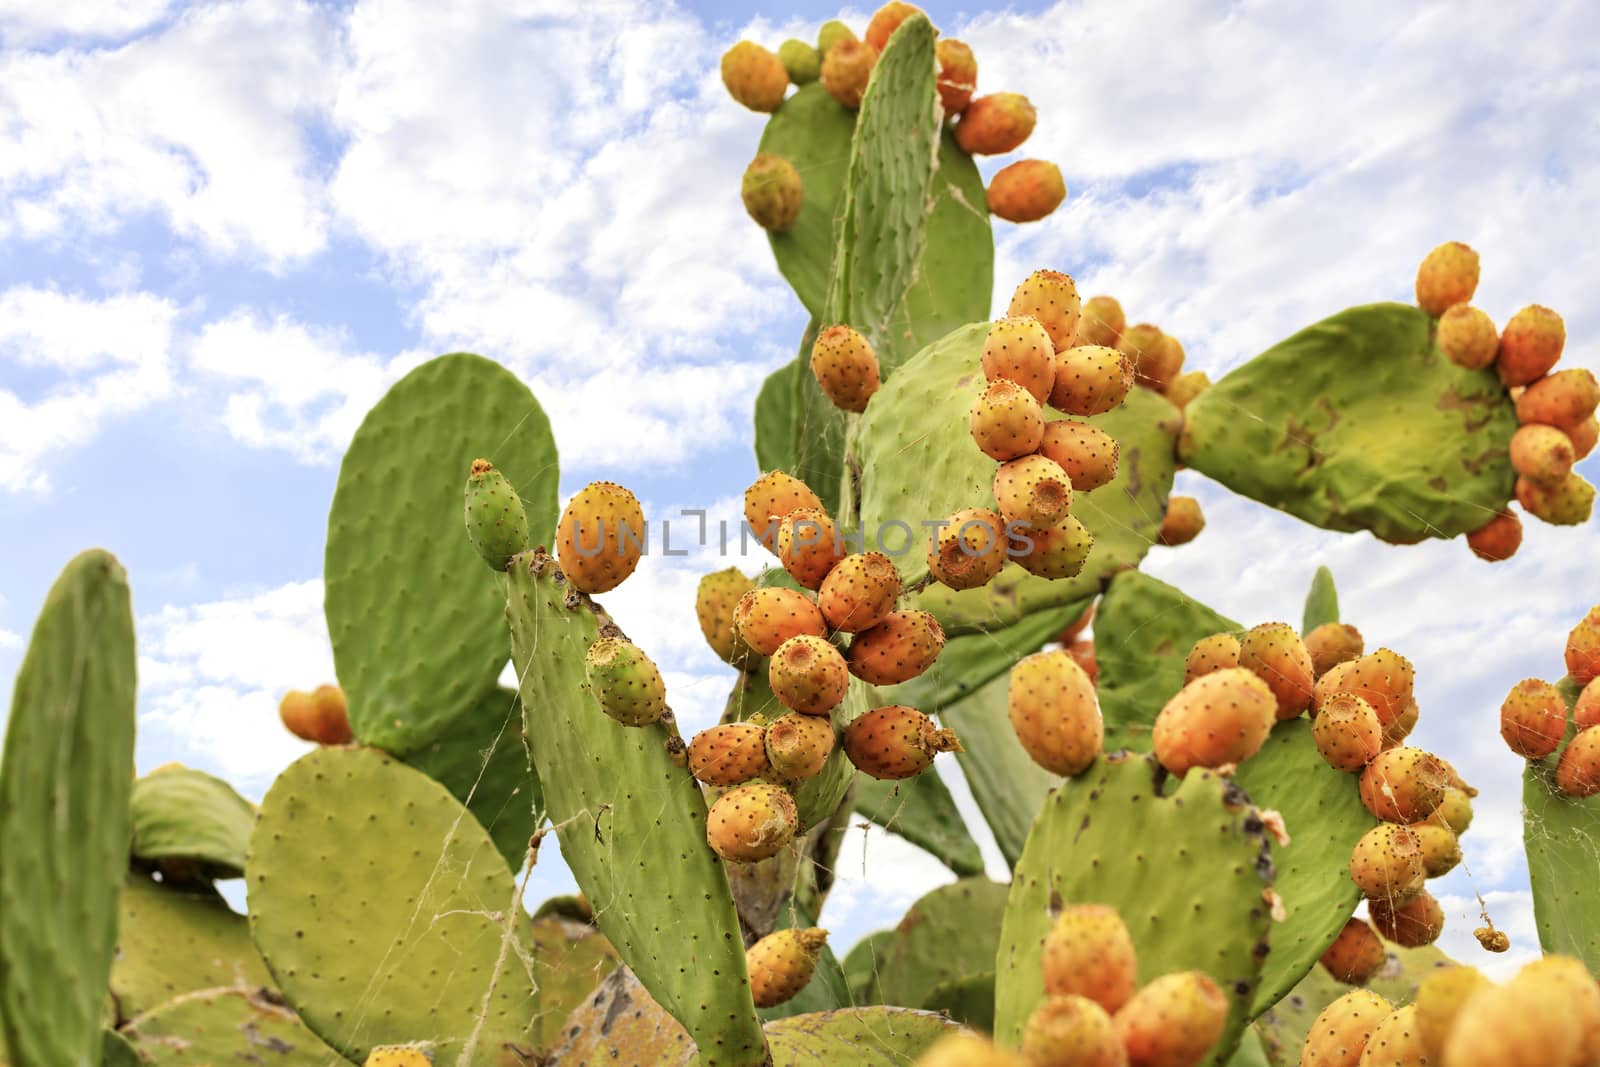 Fruits of an orange ripe sweet cactus of prickly pear prickly pear cactus against the background of a blue slightly cloudy sky. by Sergii